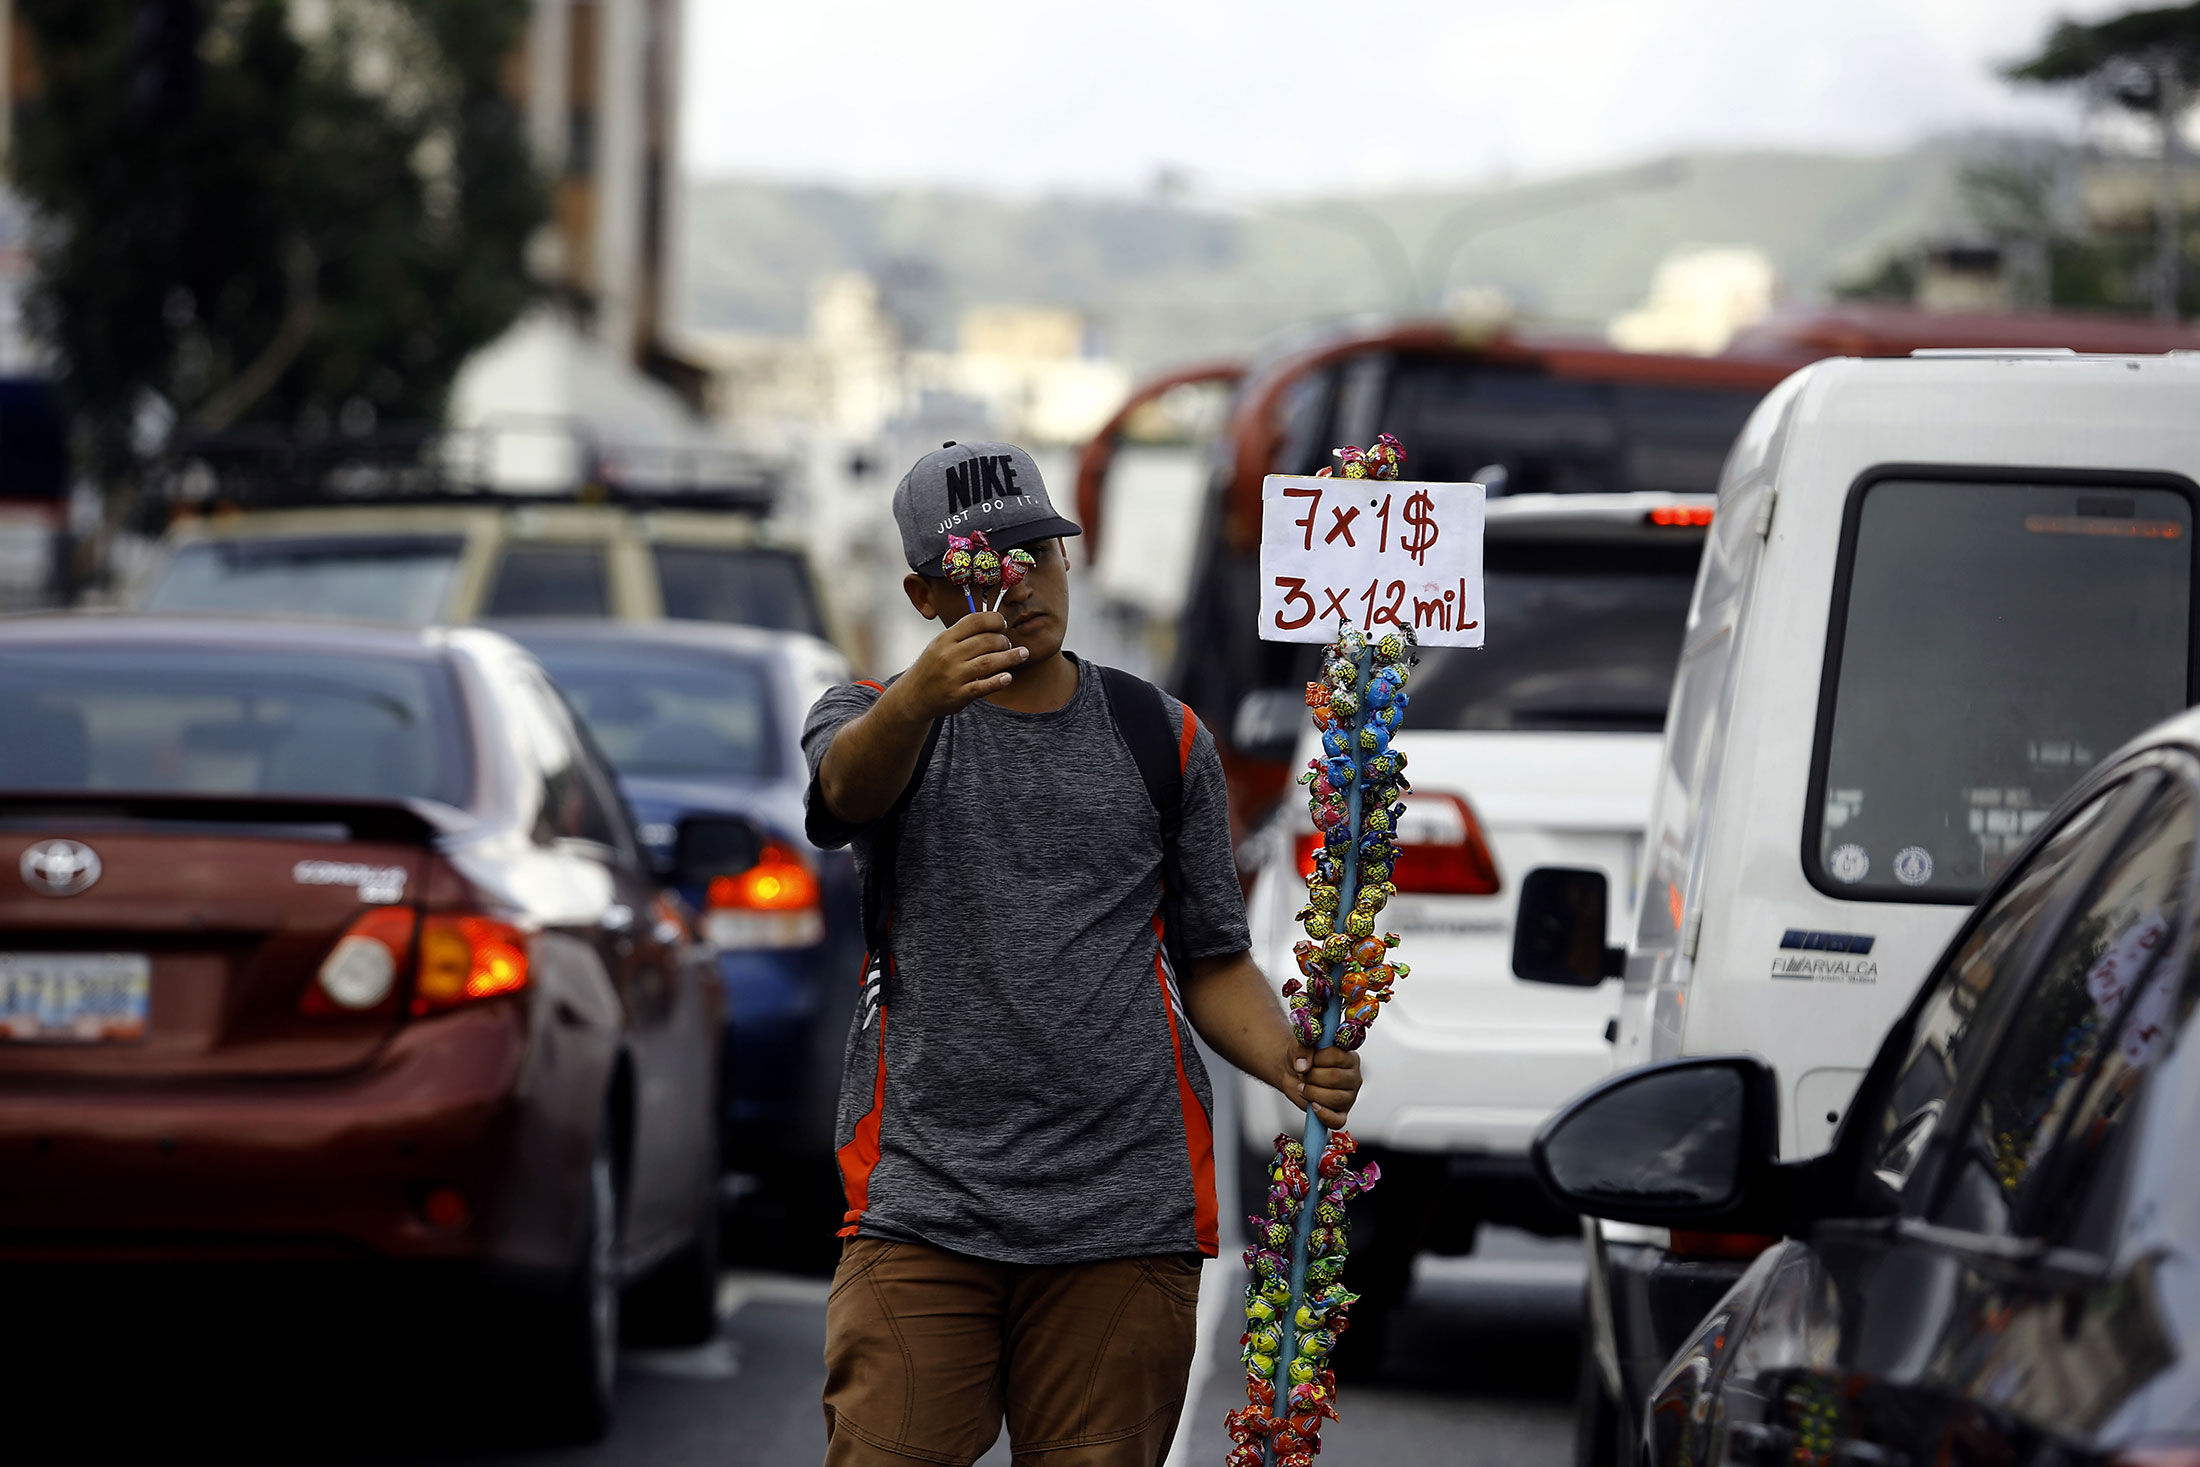 A young man peddles candy priced in dollars and bolívares at a traffic light in Valencia, Venezuela, on Nov. 1, 2019.